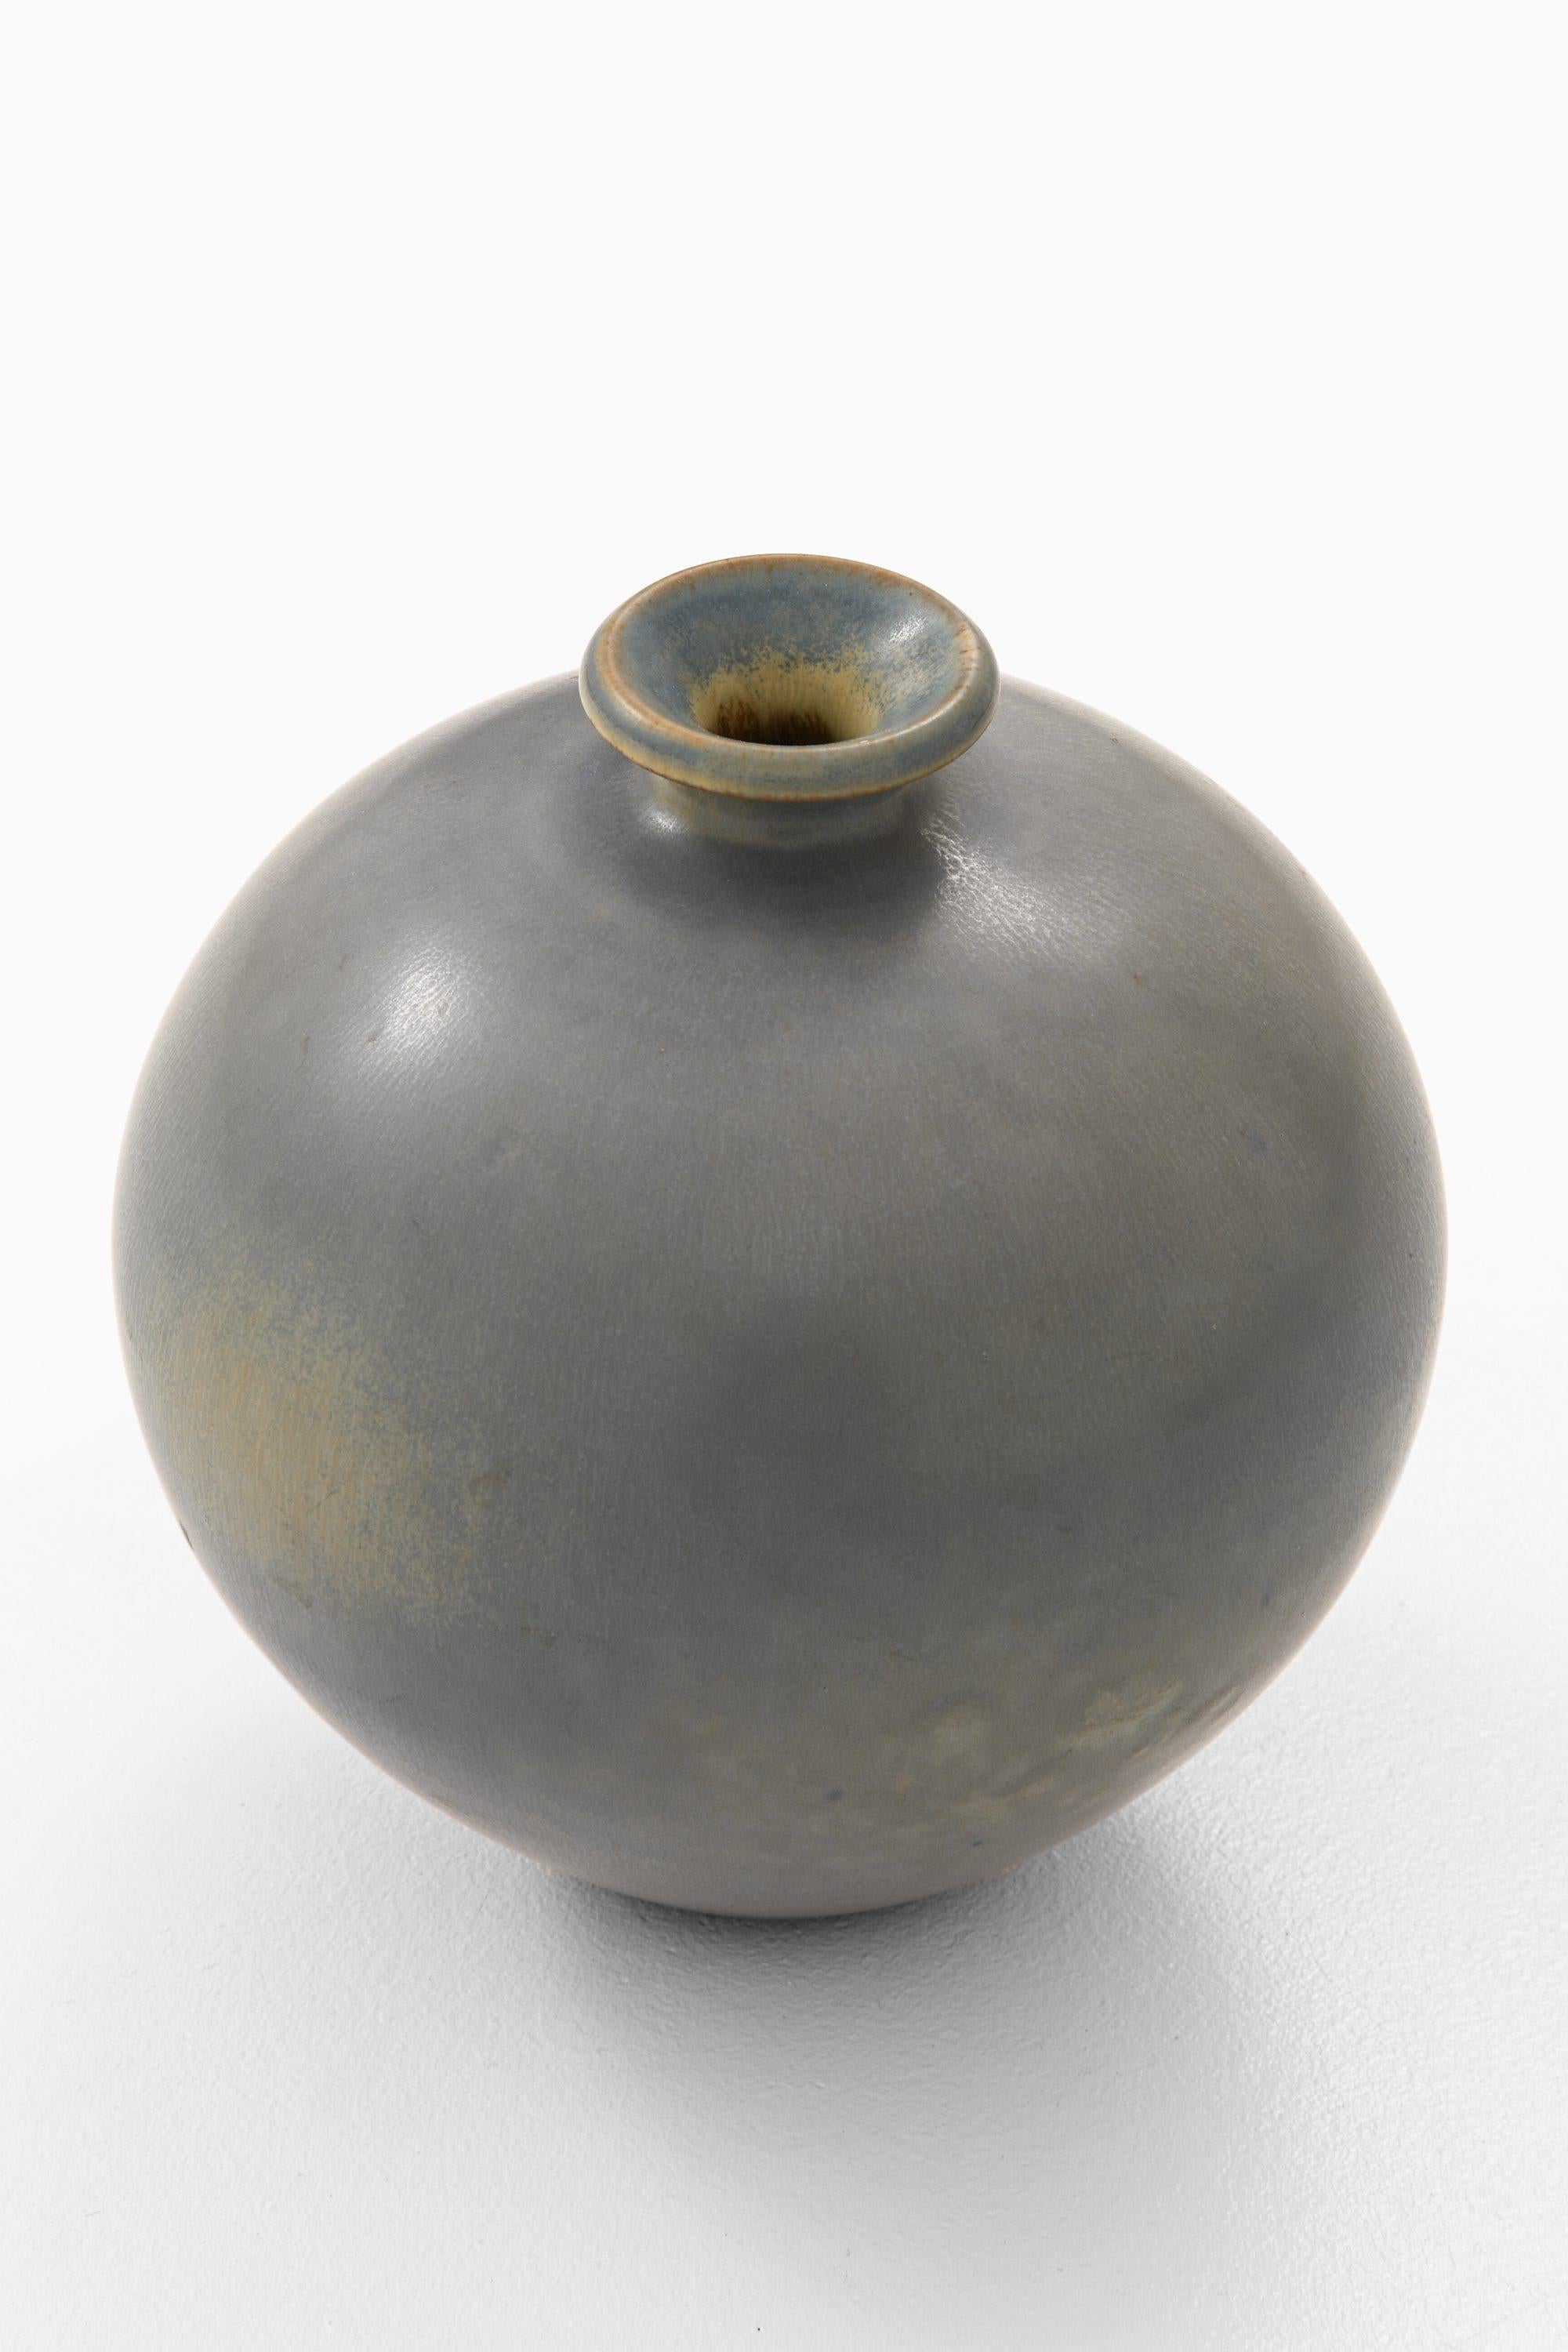 Ceramic Vase in Hare Fur Glaze by Berndt Friberg, 1960

Additional Information:
Material: Ceramic, Hare fur glaze
Style: Mid century, Scandinavia
Produced by Gustavsberg in Sweden
Dimensions (W x D x H): 16 x 16 x 17 cm
Condition: Good vintage